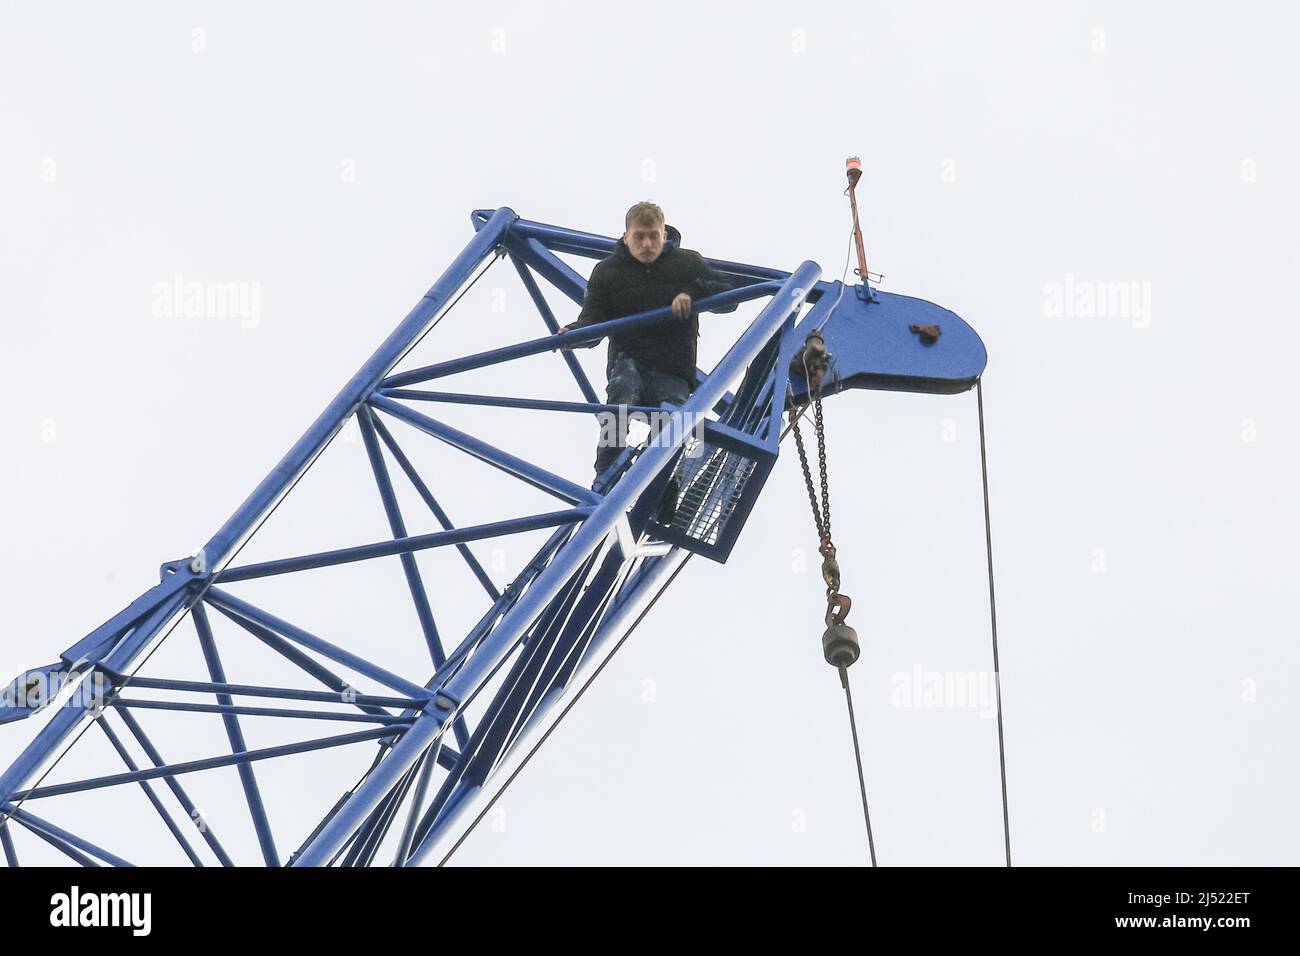 London, UK. 19th Apr, 2022. A man has climbed up the scaffolding and then  to the top of a tall construction crane at an office building construction  site at 2 Victoria Street.